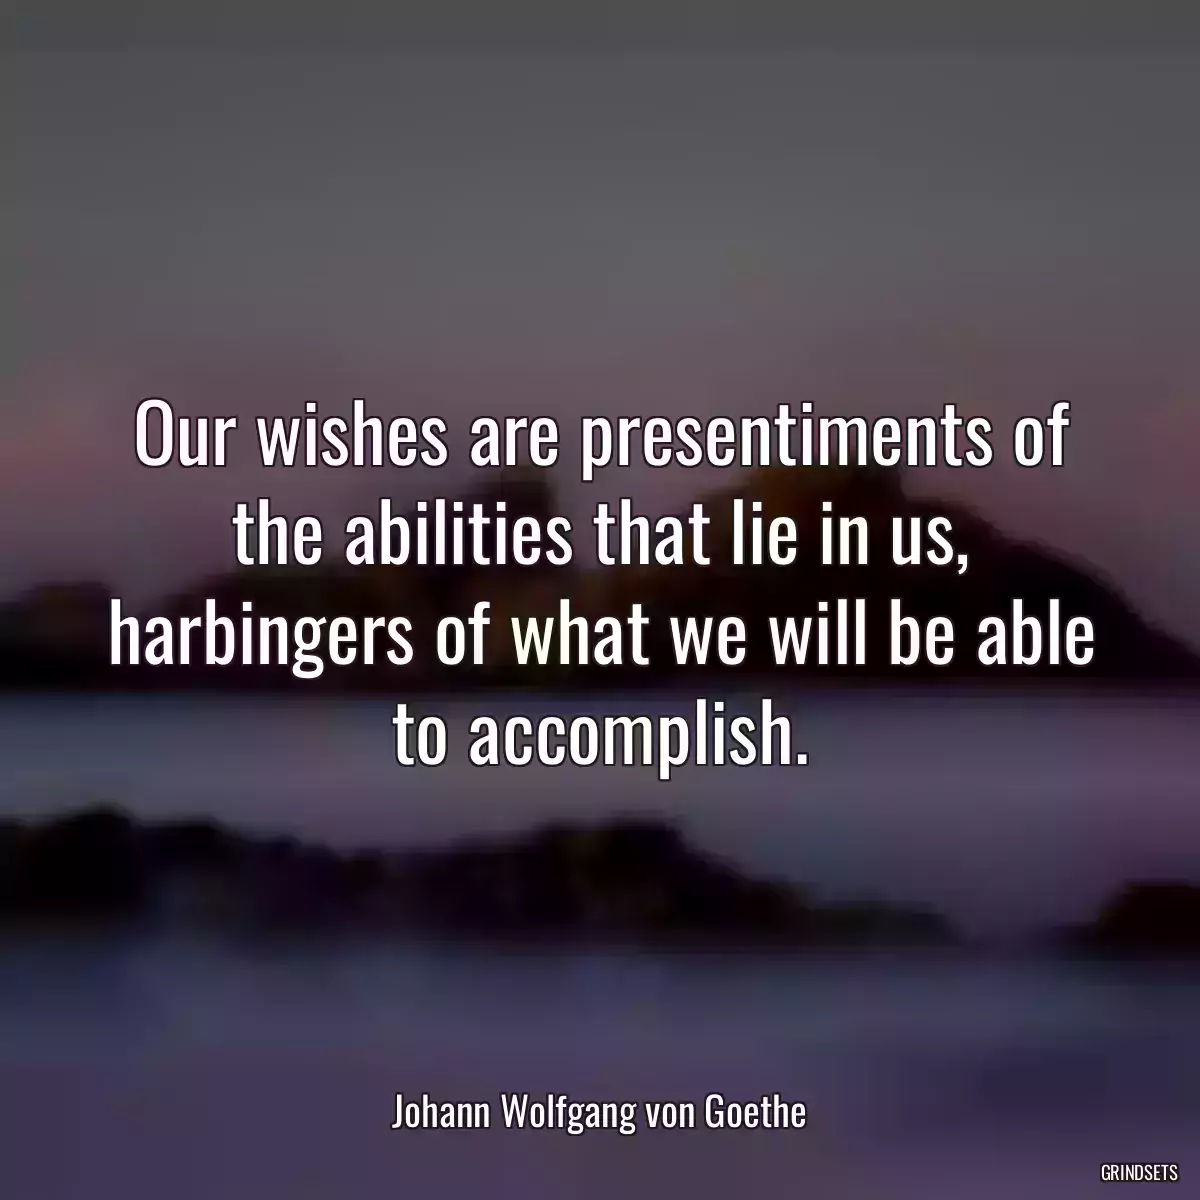 Our wishes are presentiments of the abilities that lie in us, harbingers of what we will be able to accomplish.